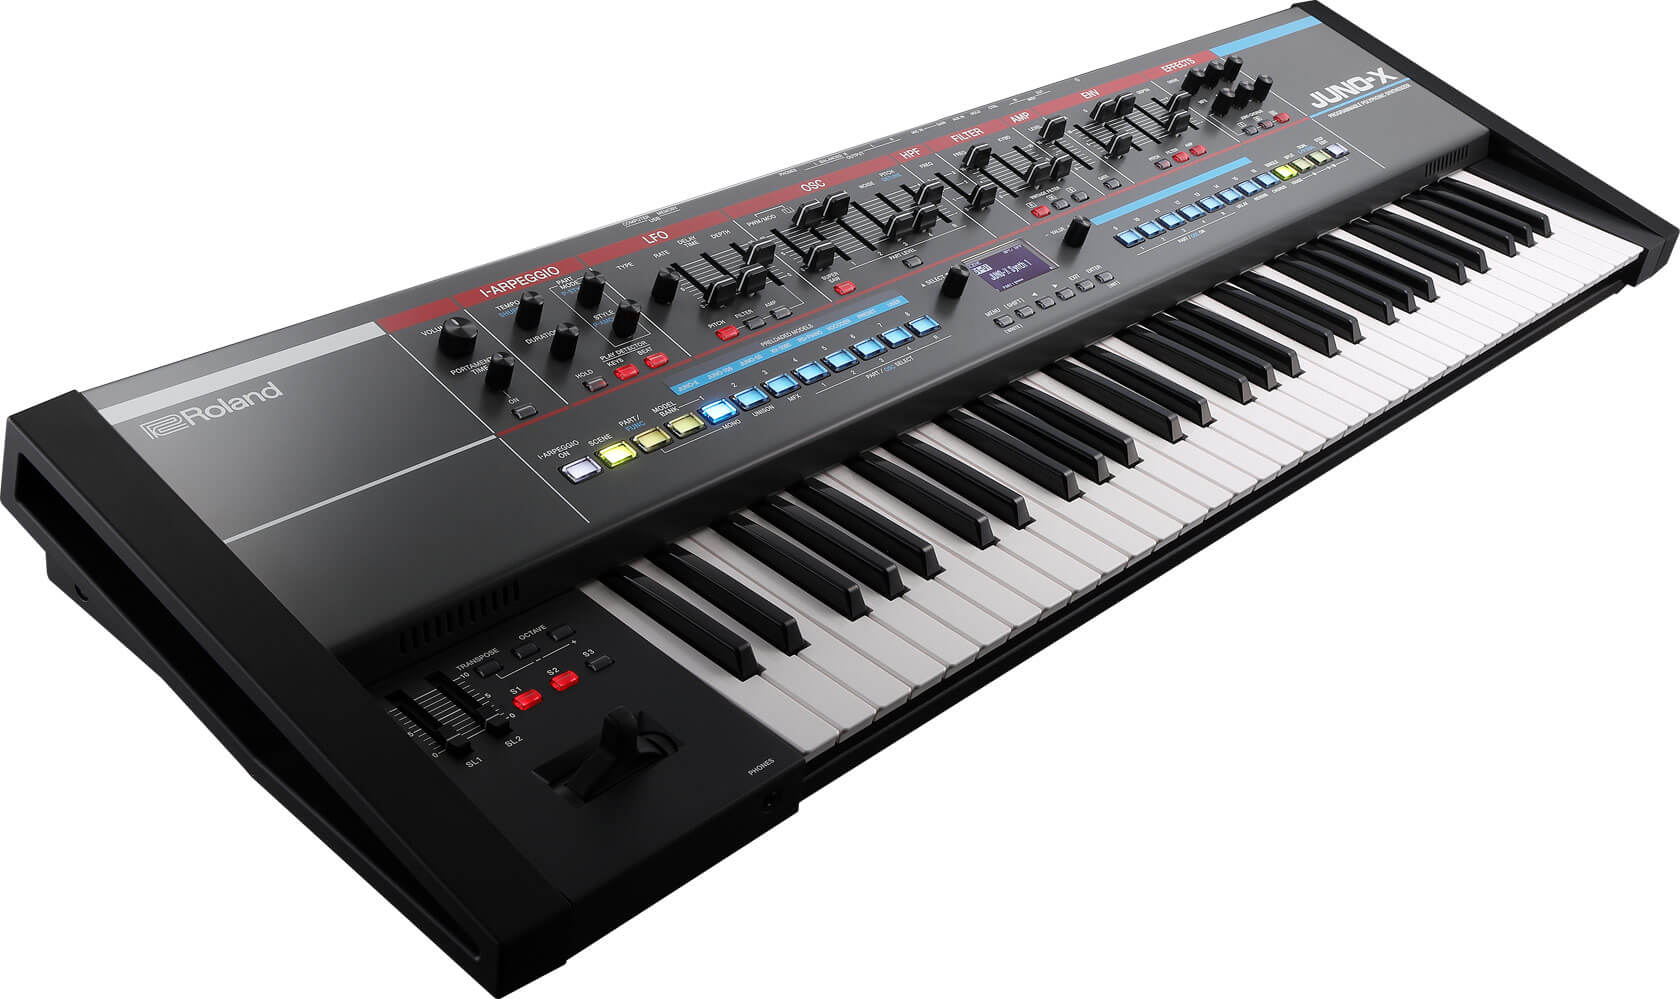 The build of the Roland JUNO-X resembles its older siblings. But Roland certainly haven't over done it with new, unnecessary features. Three powerful synth engines call for hours of fun.